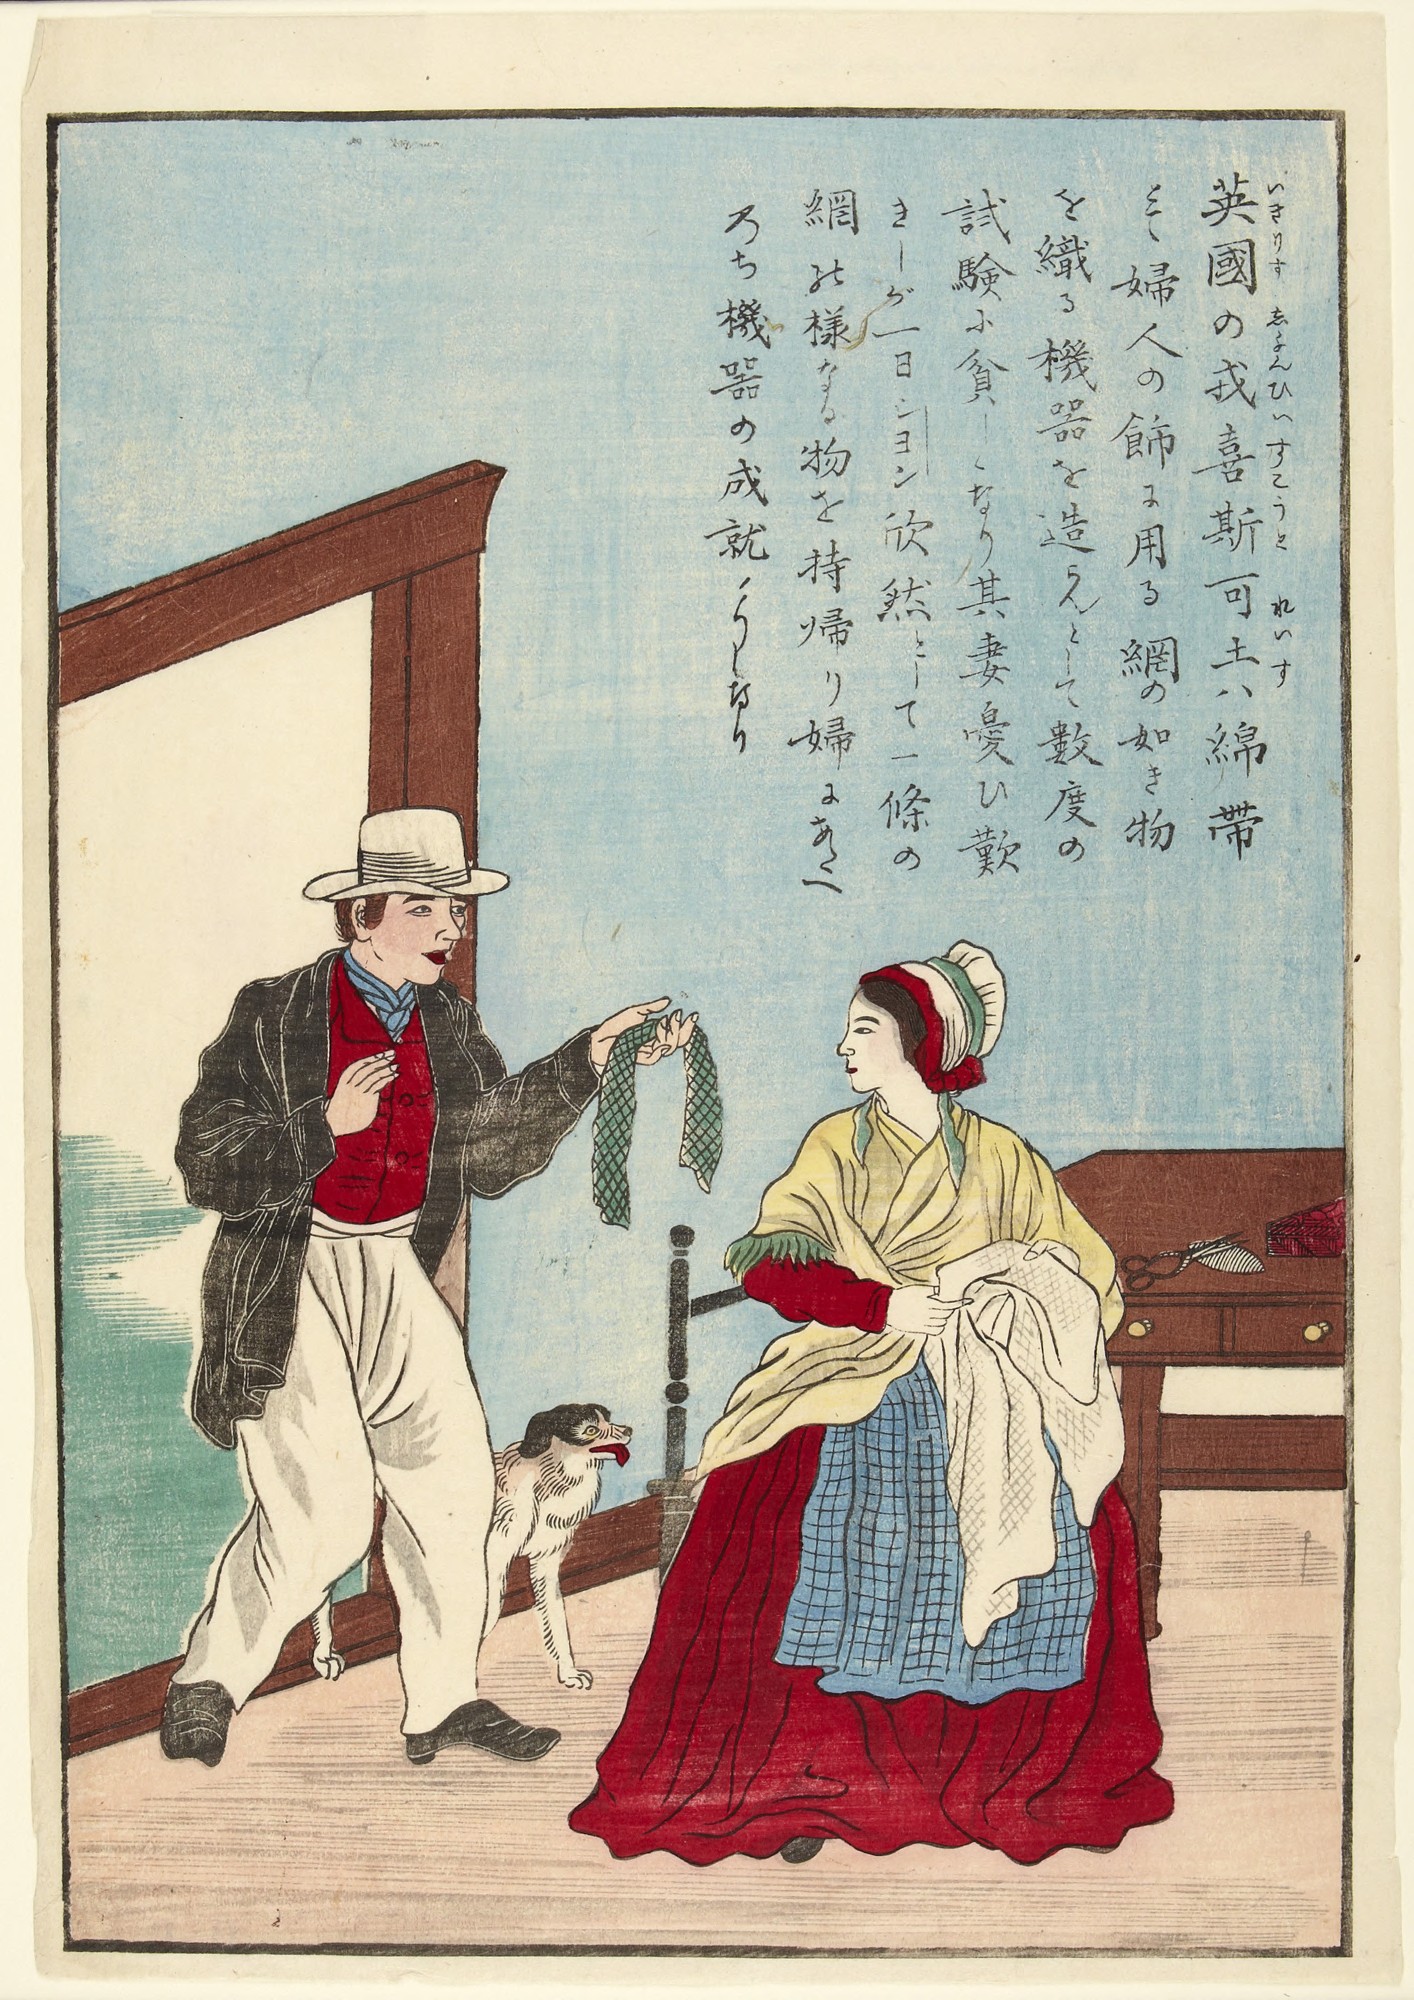 Japanese woodblock print by anonymous author